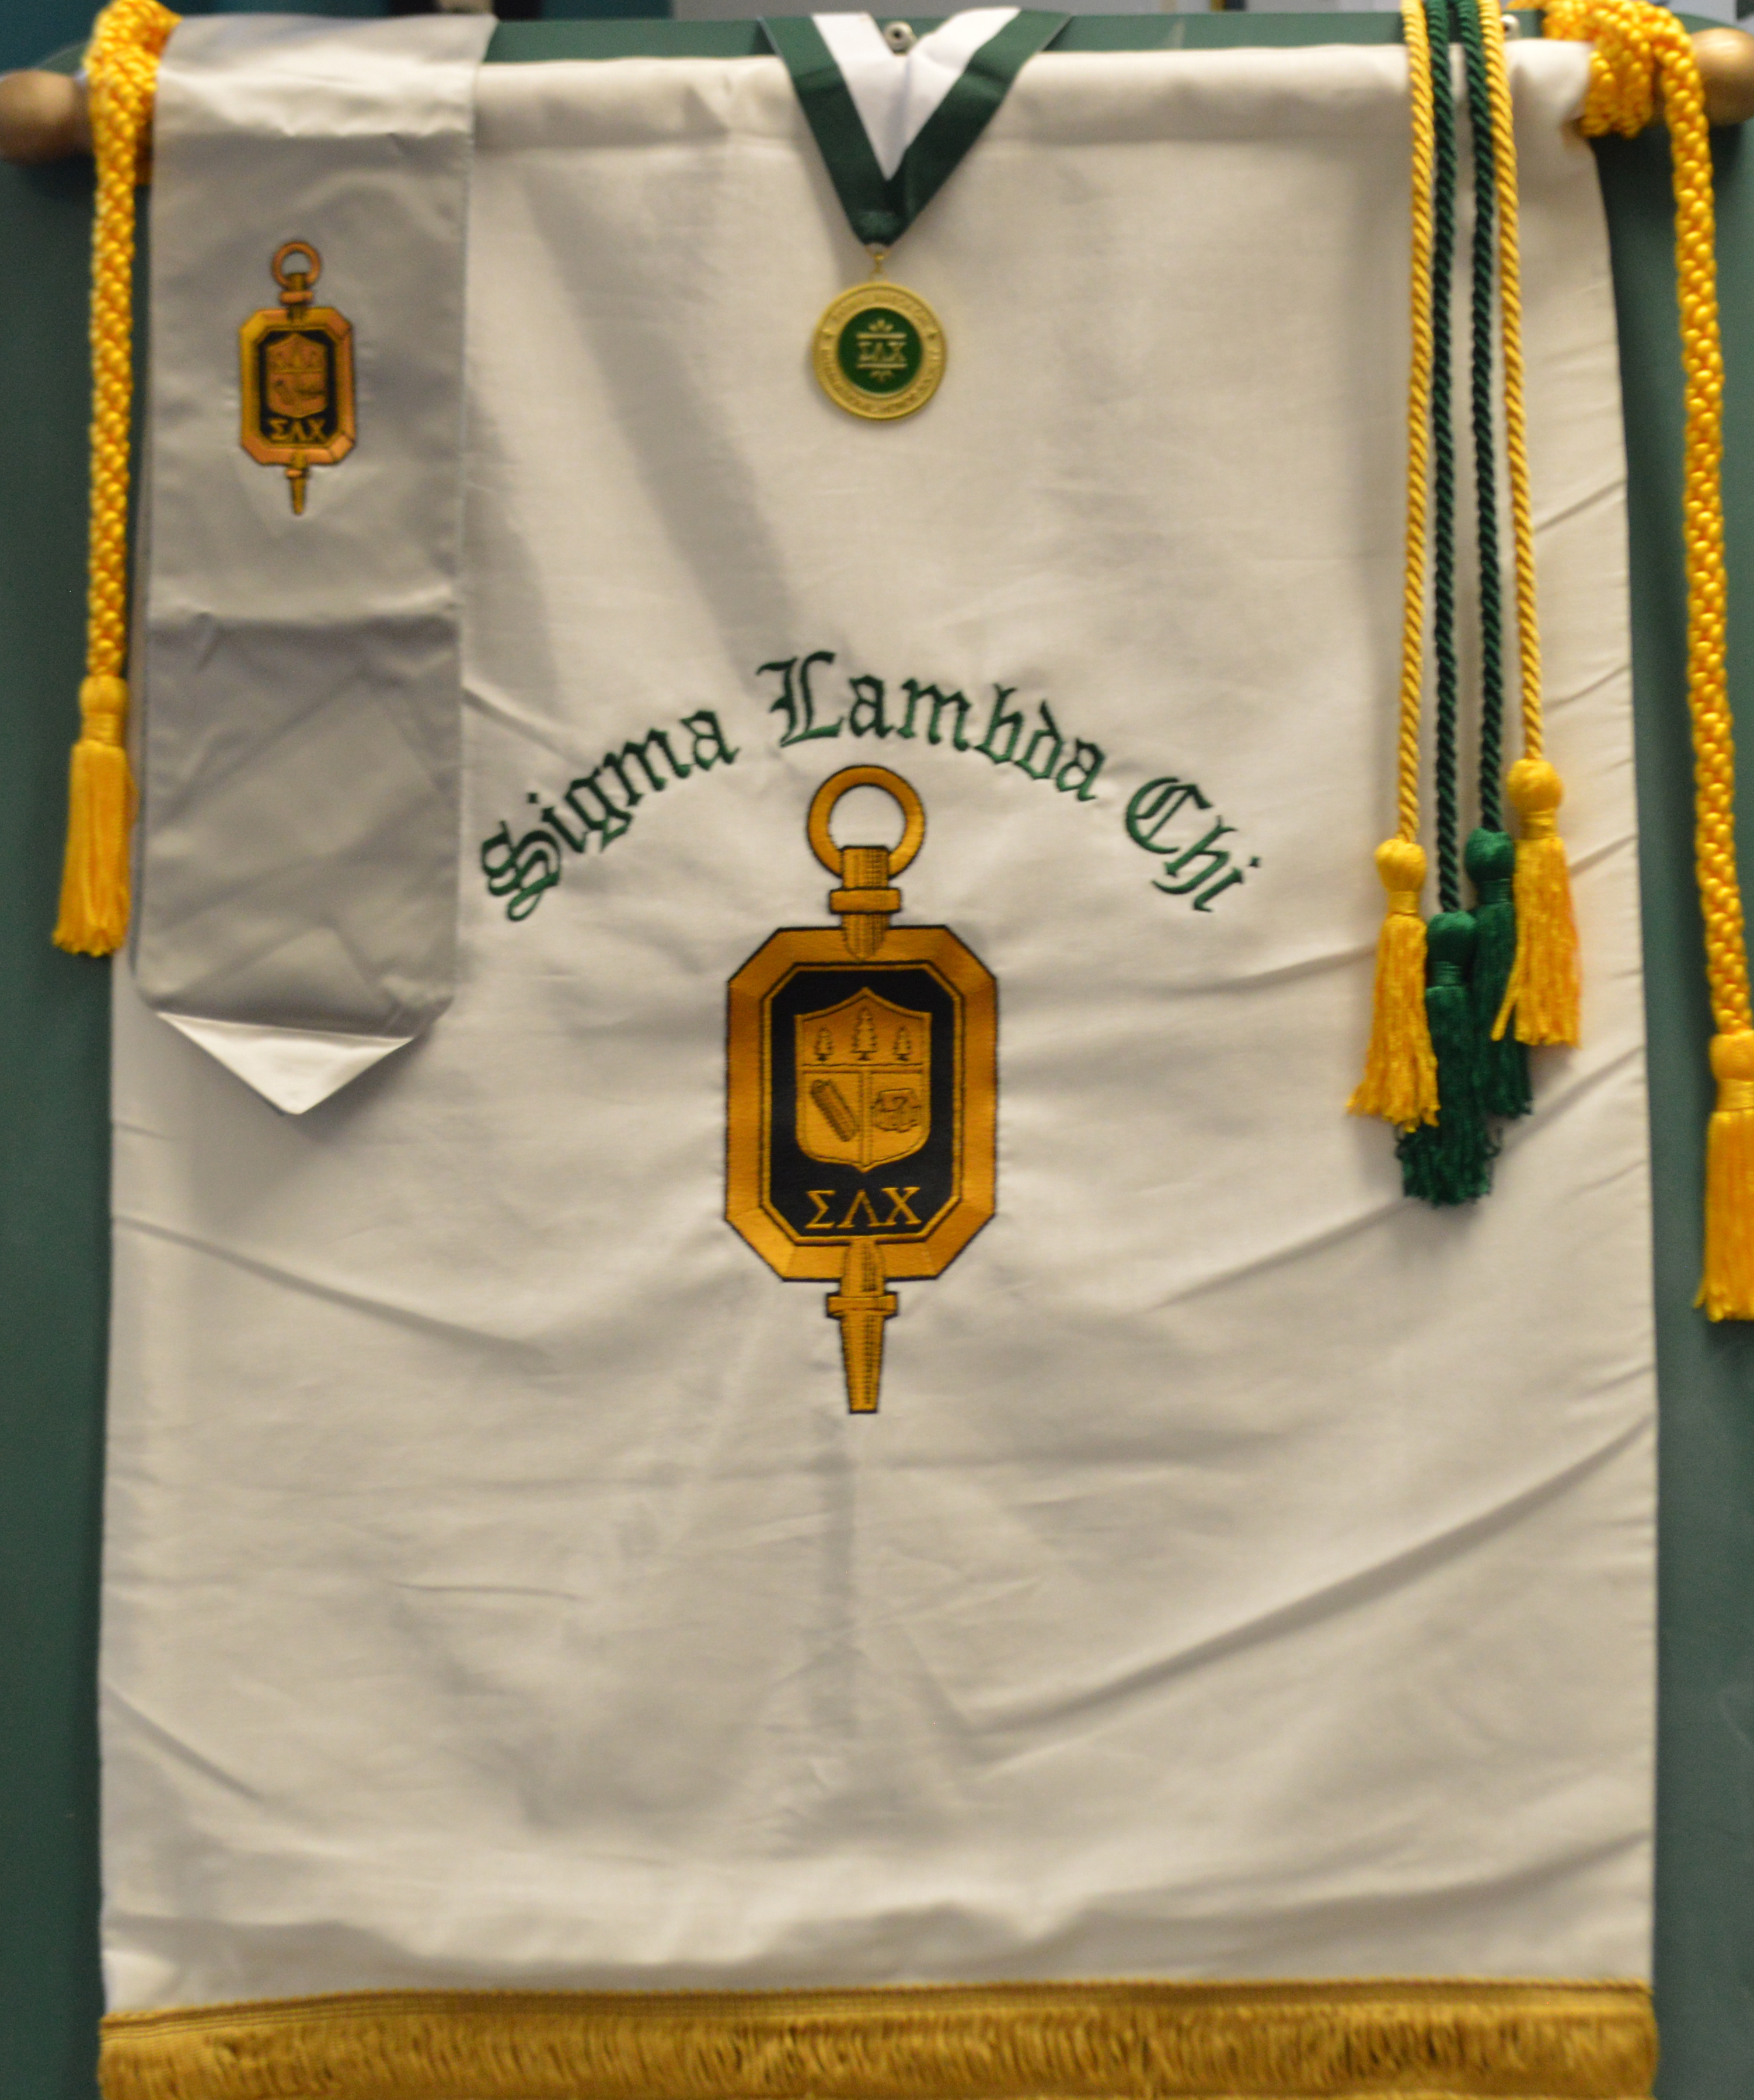 SLC official honor society banner with graduation tassles and medal that are usually presented to new members.